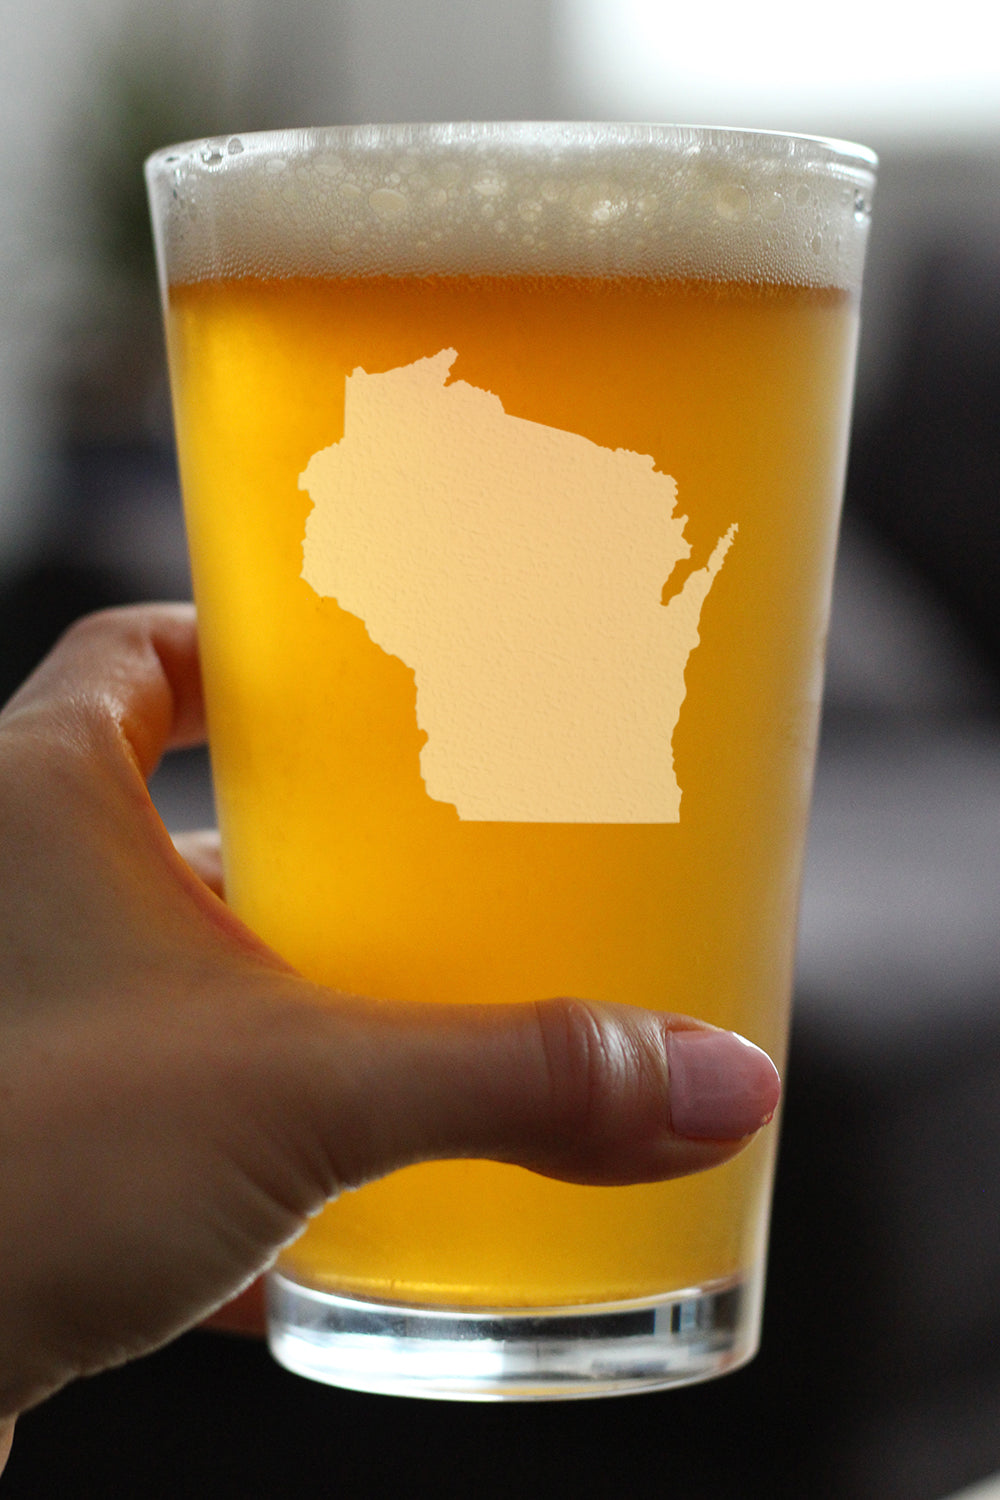 Wisconsin State Outline Pint Glass for Beer - State Themed Drinking Decor and Gifts for Wisconsinite Women &amp; Men - 16 Oz Glasses